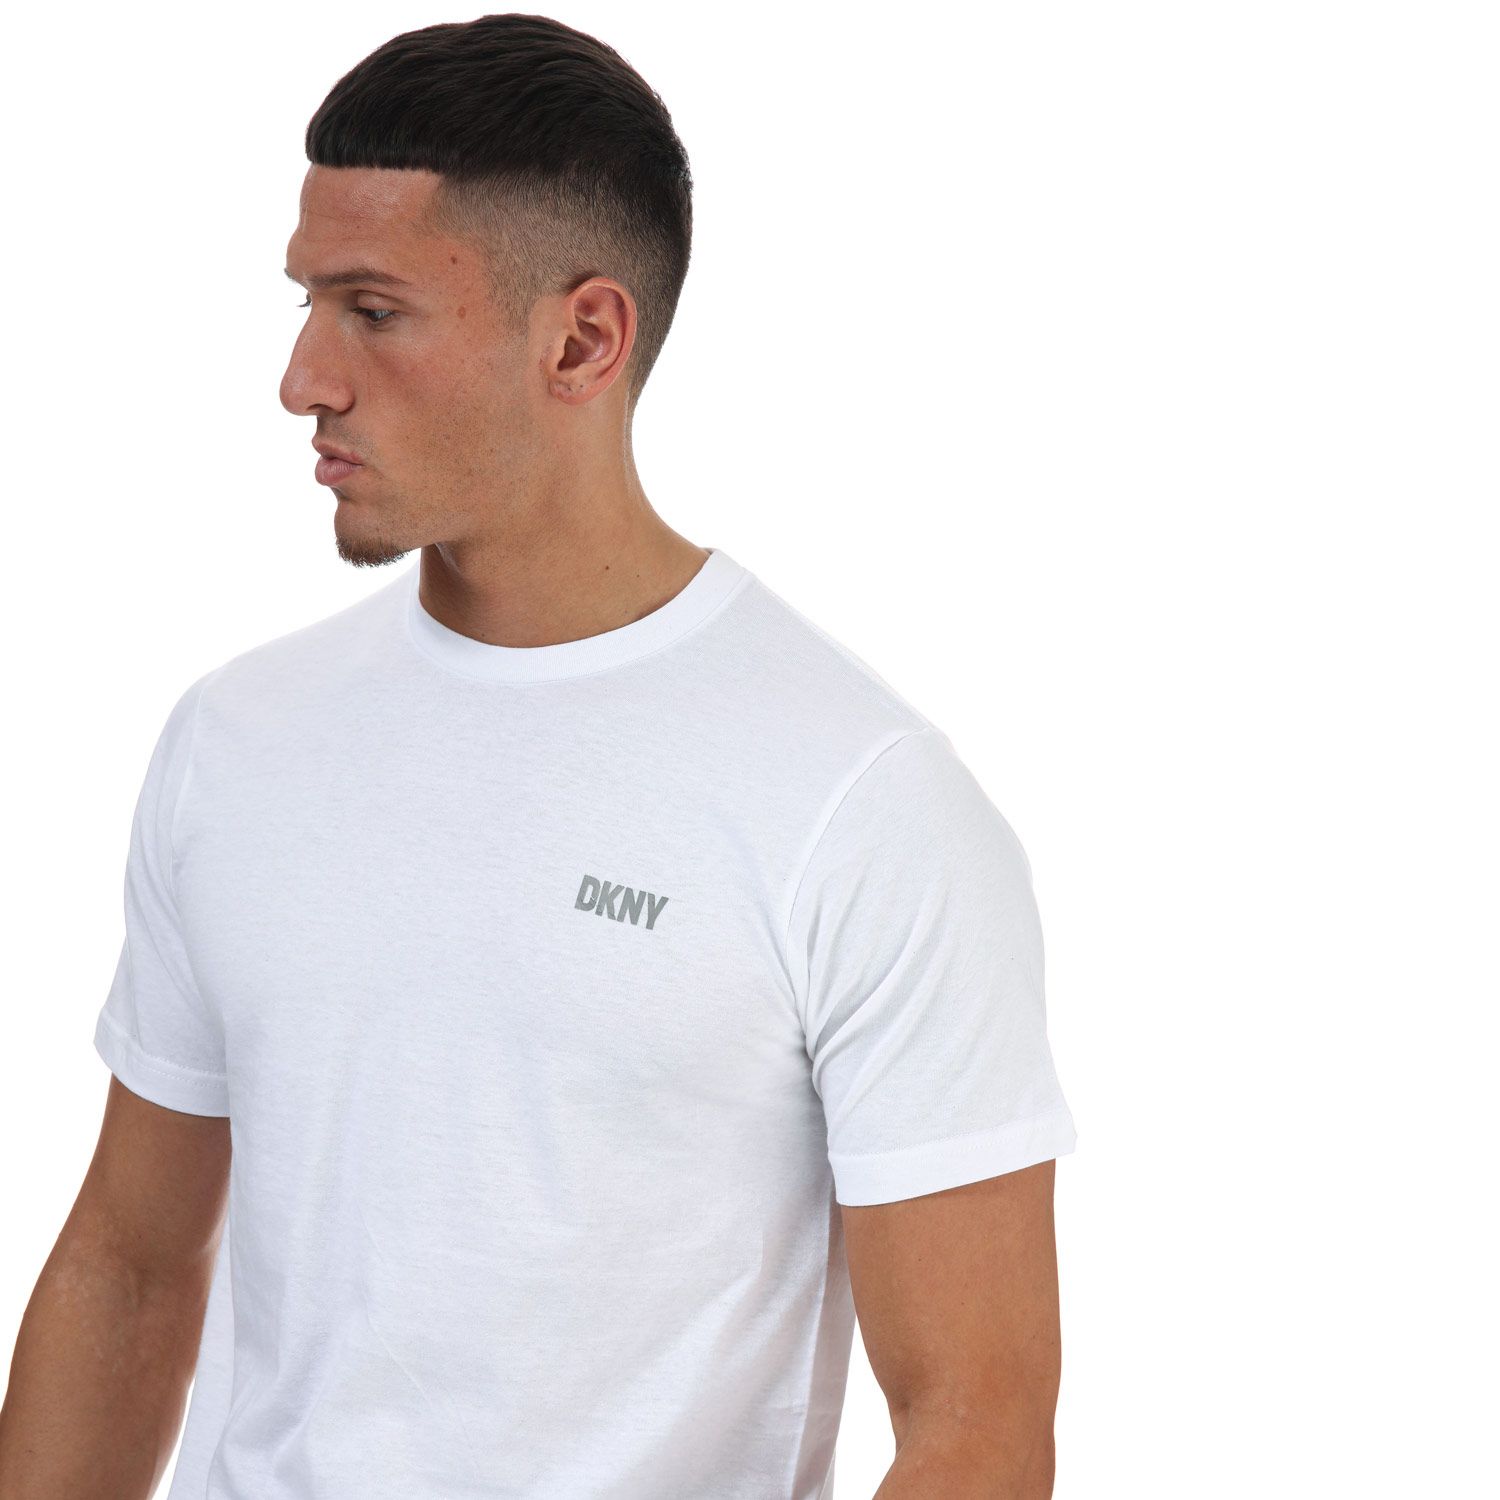 DKNY Mens Lounge Label The White Navy 3 Get - Giants Pack T-Shirts